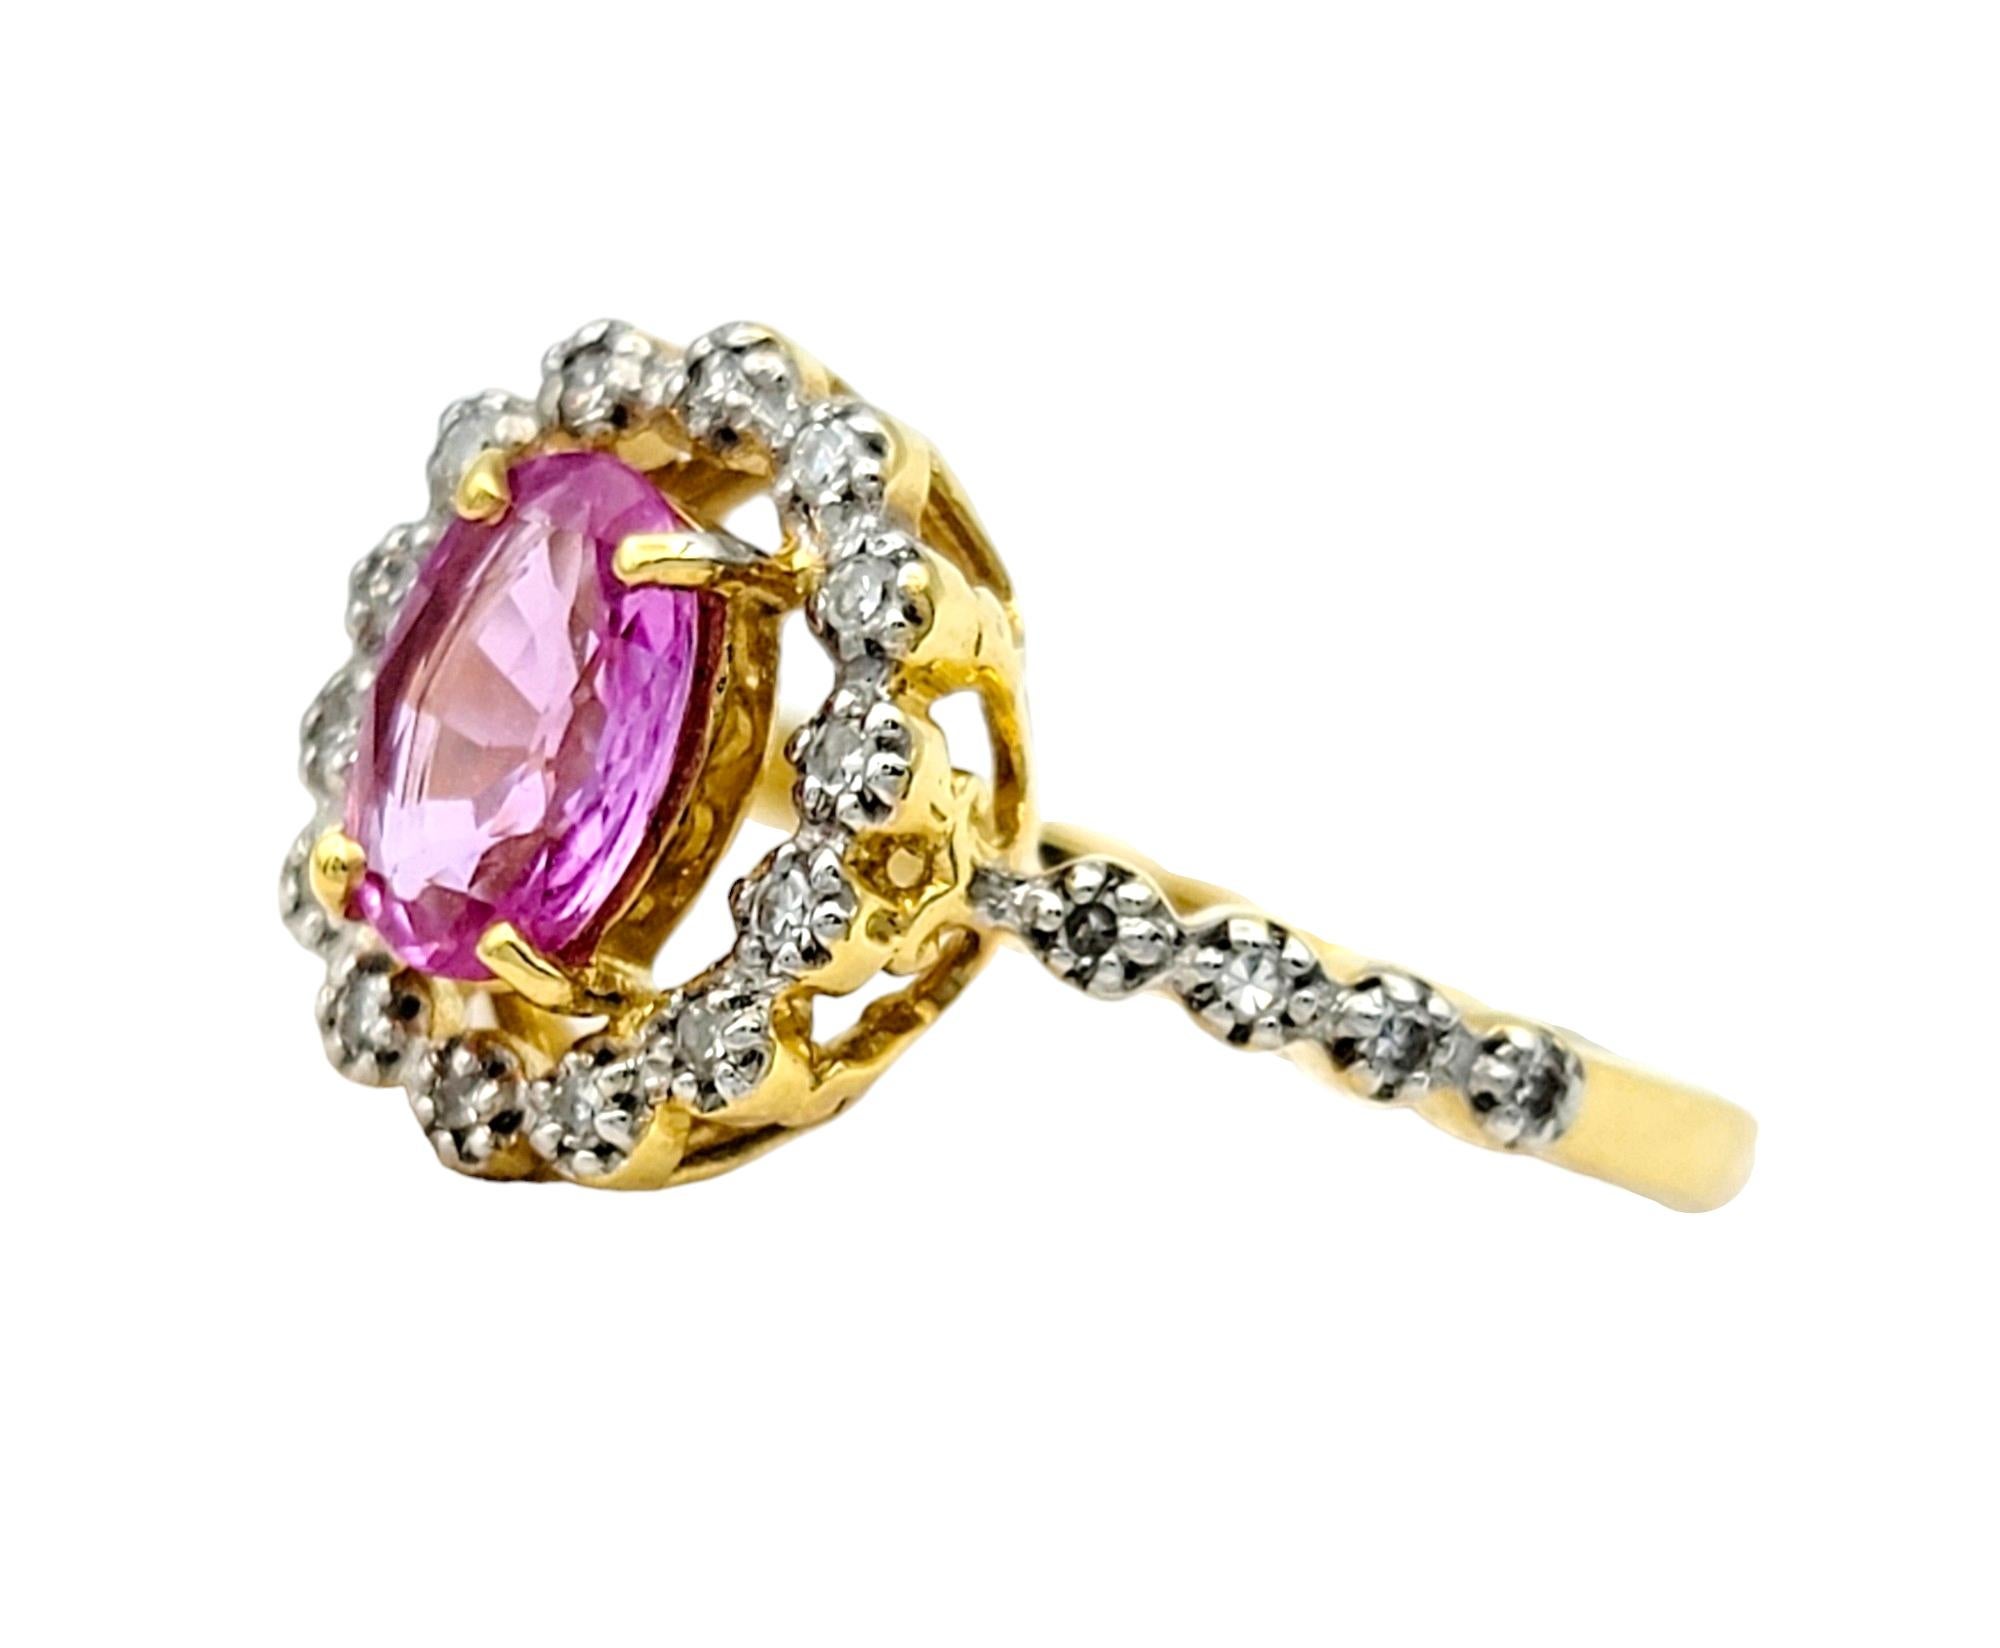 Oval Cut Pink Sapphire Ring with Floating Diamond Halo in 18 Karat Yellow Gold  In Good Condition For Sale In Scottsdale, AZ